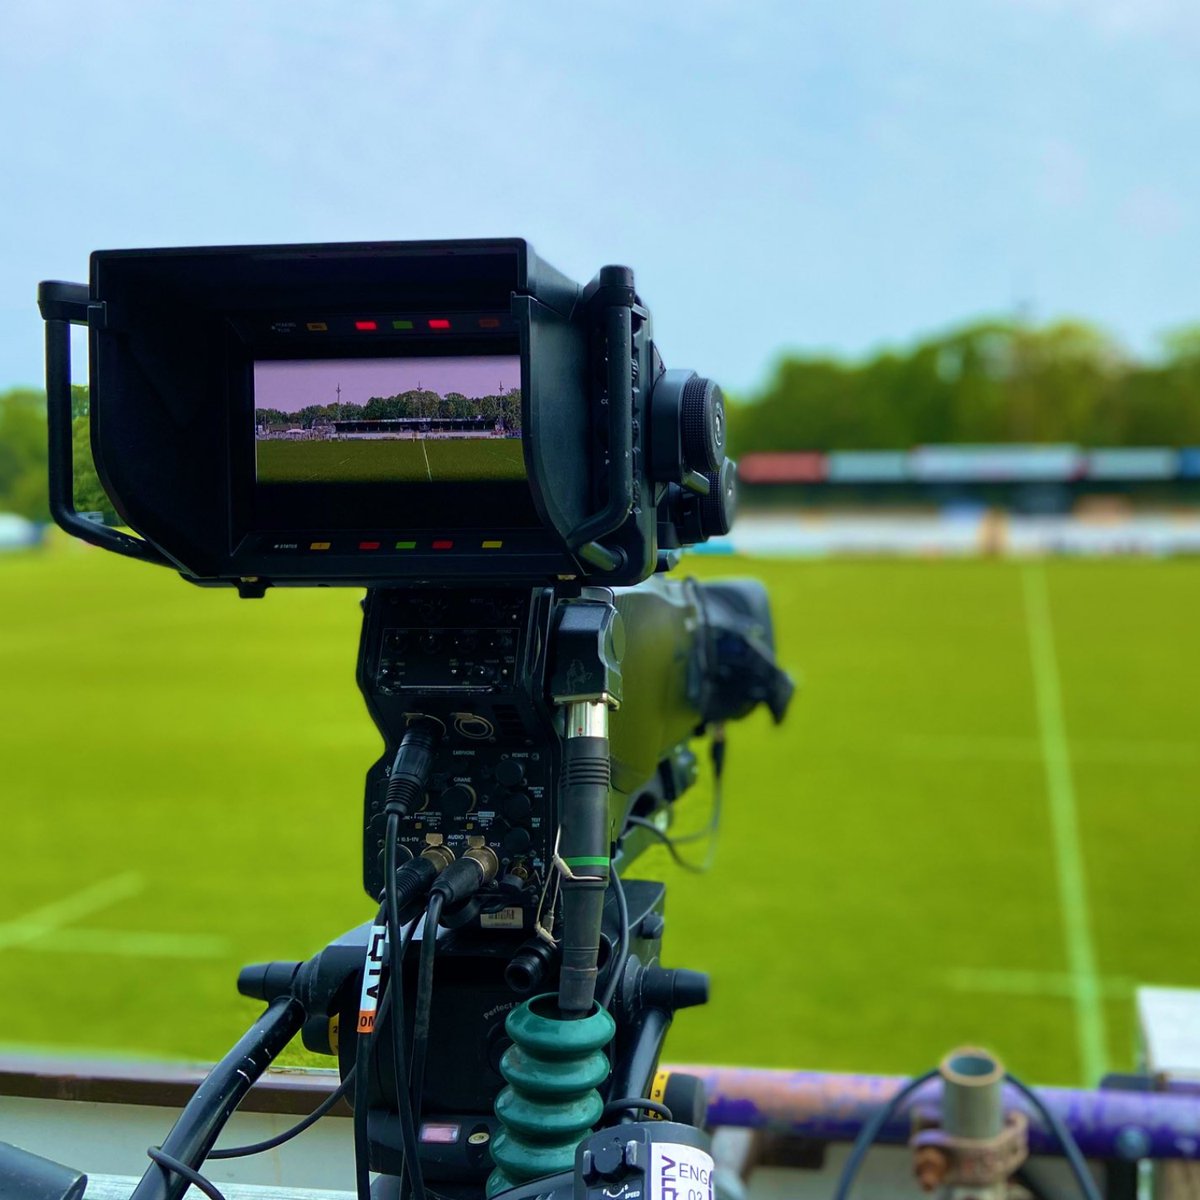 Unable to attend tomorrow nights game? Here's where to watch: 👇 🇬🇧 In the UK - BBC ALBA & BBC iPlayer 🌍 Outside of the UK - Scottish Rugby Website & YouTube channel 🆚 Watsonians 🏆 FOSROC Super Series Sprint 📍 Millbrae ⏰ 7:35PM #backingthebulls | #FOSROCSuperSeries